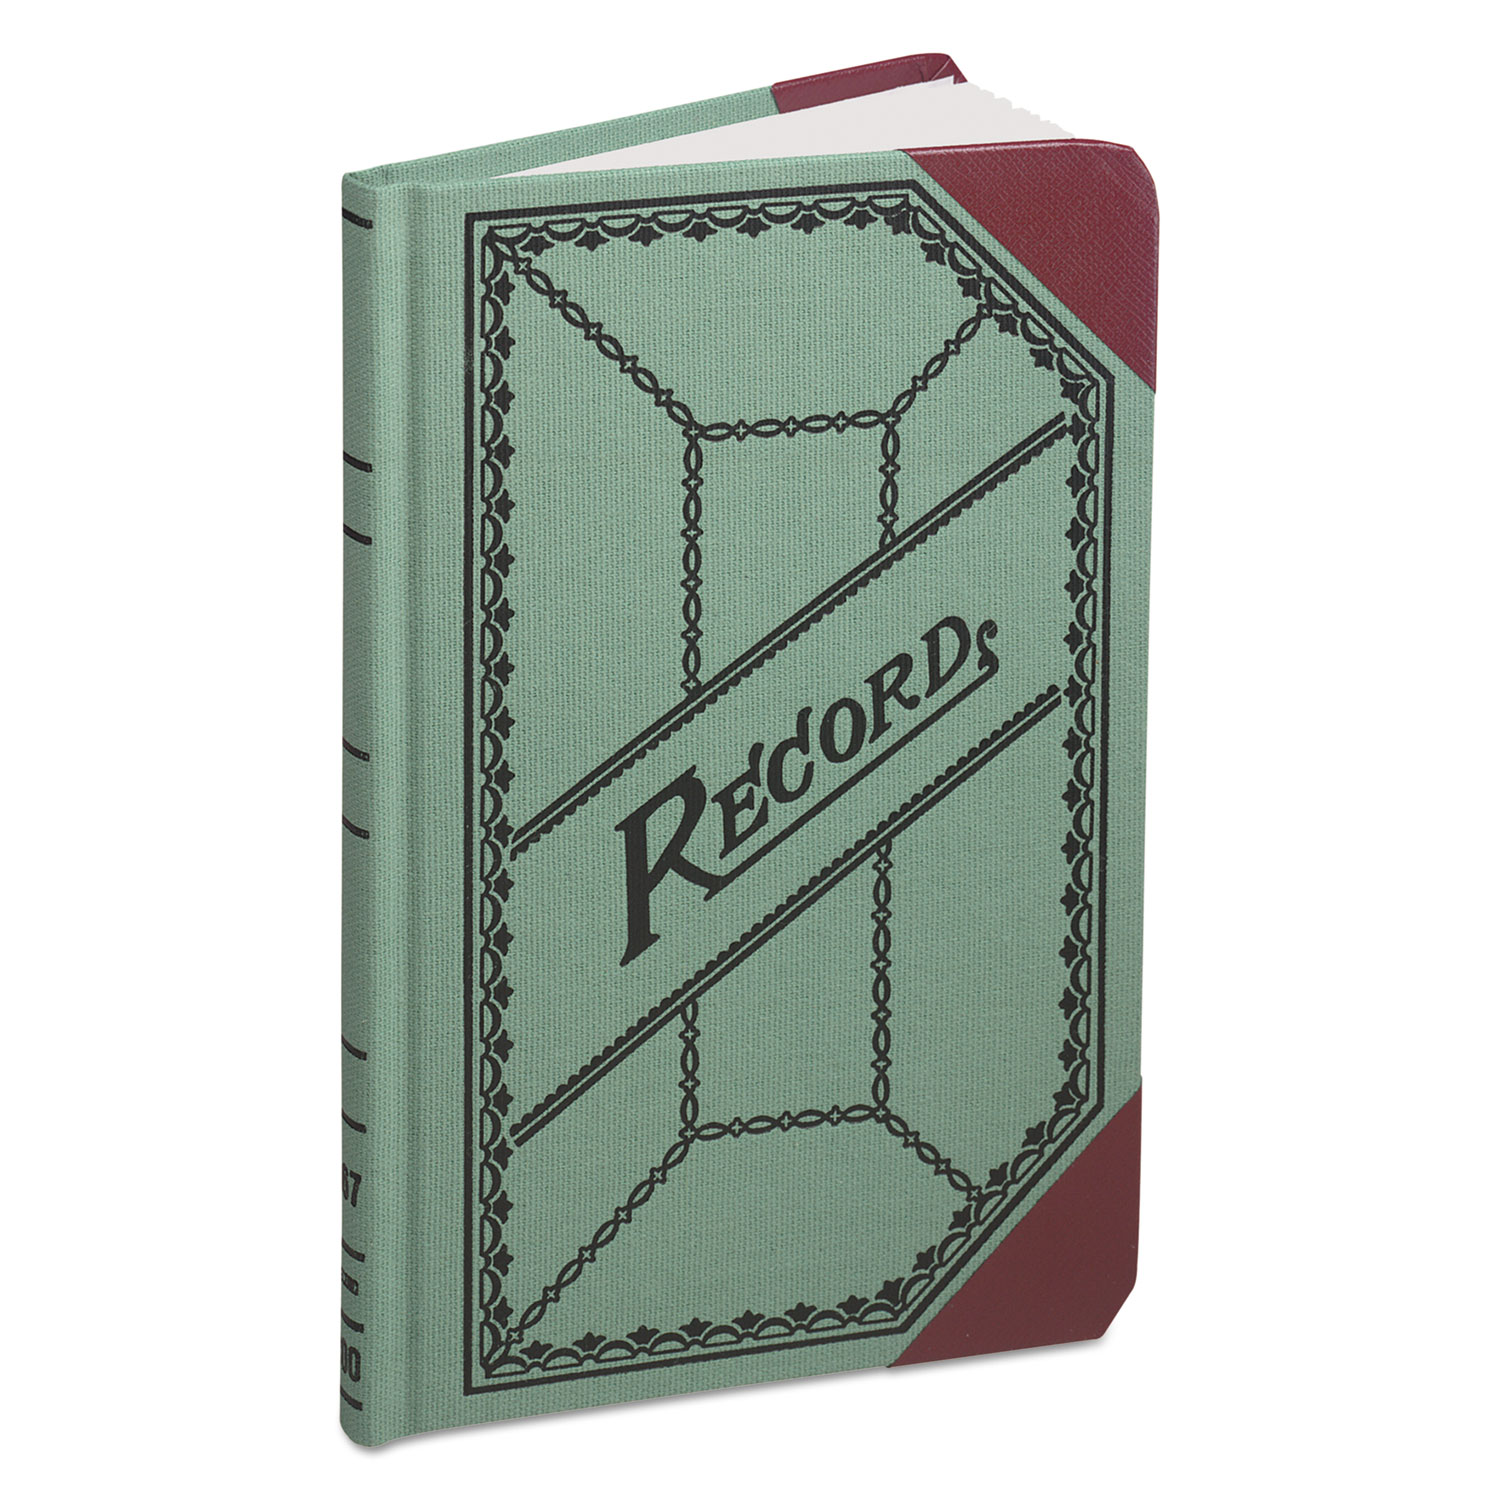 Miniature Account Book, Green/Red Canvas Cover, 200 Pages, 9 1/2 x 6